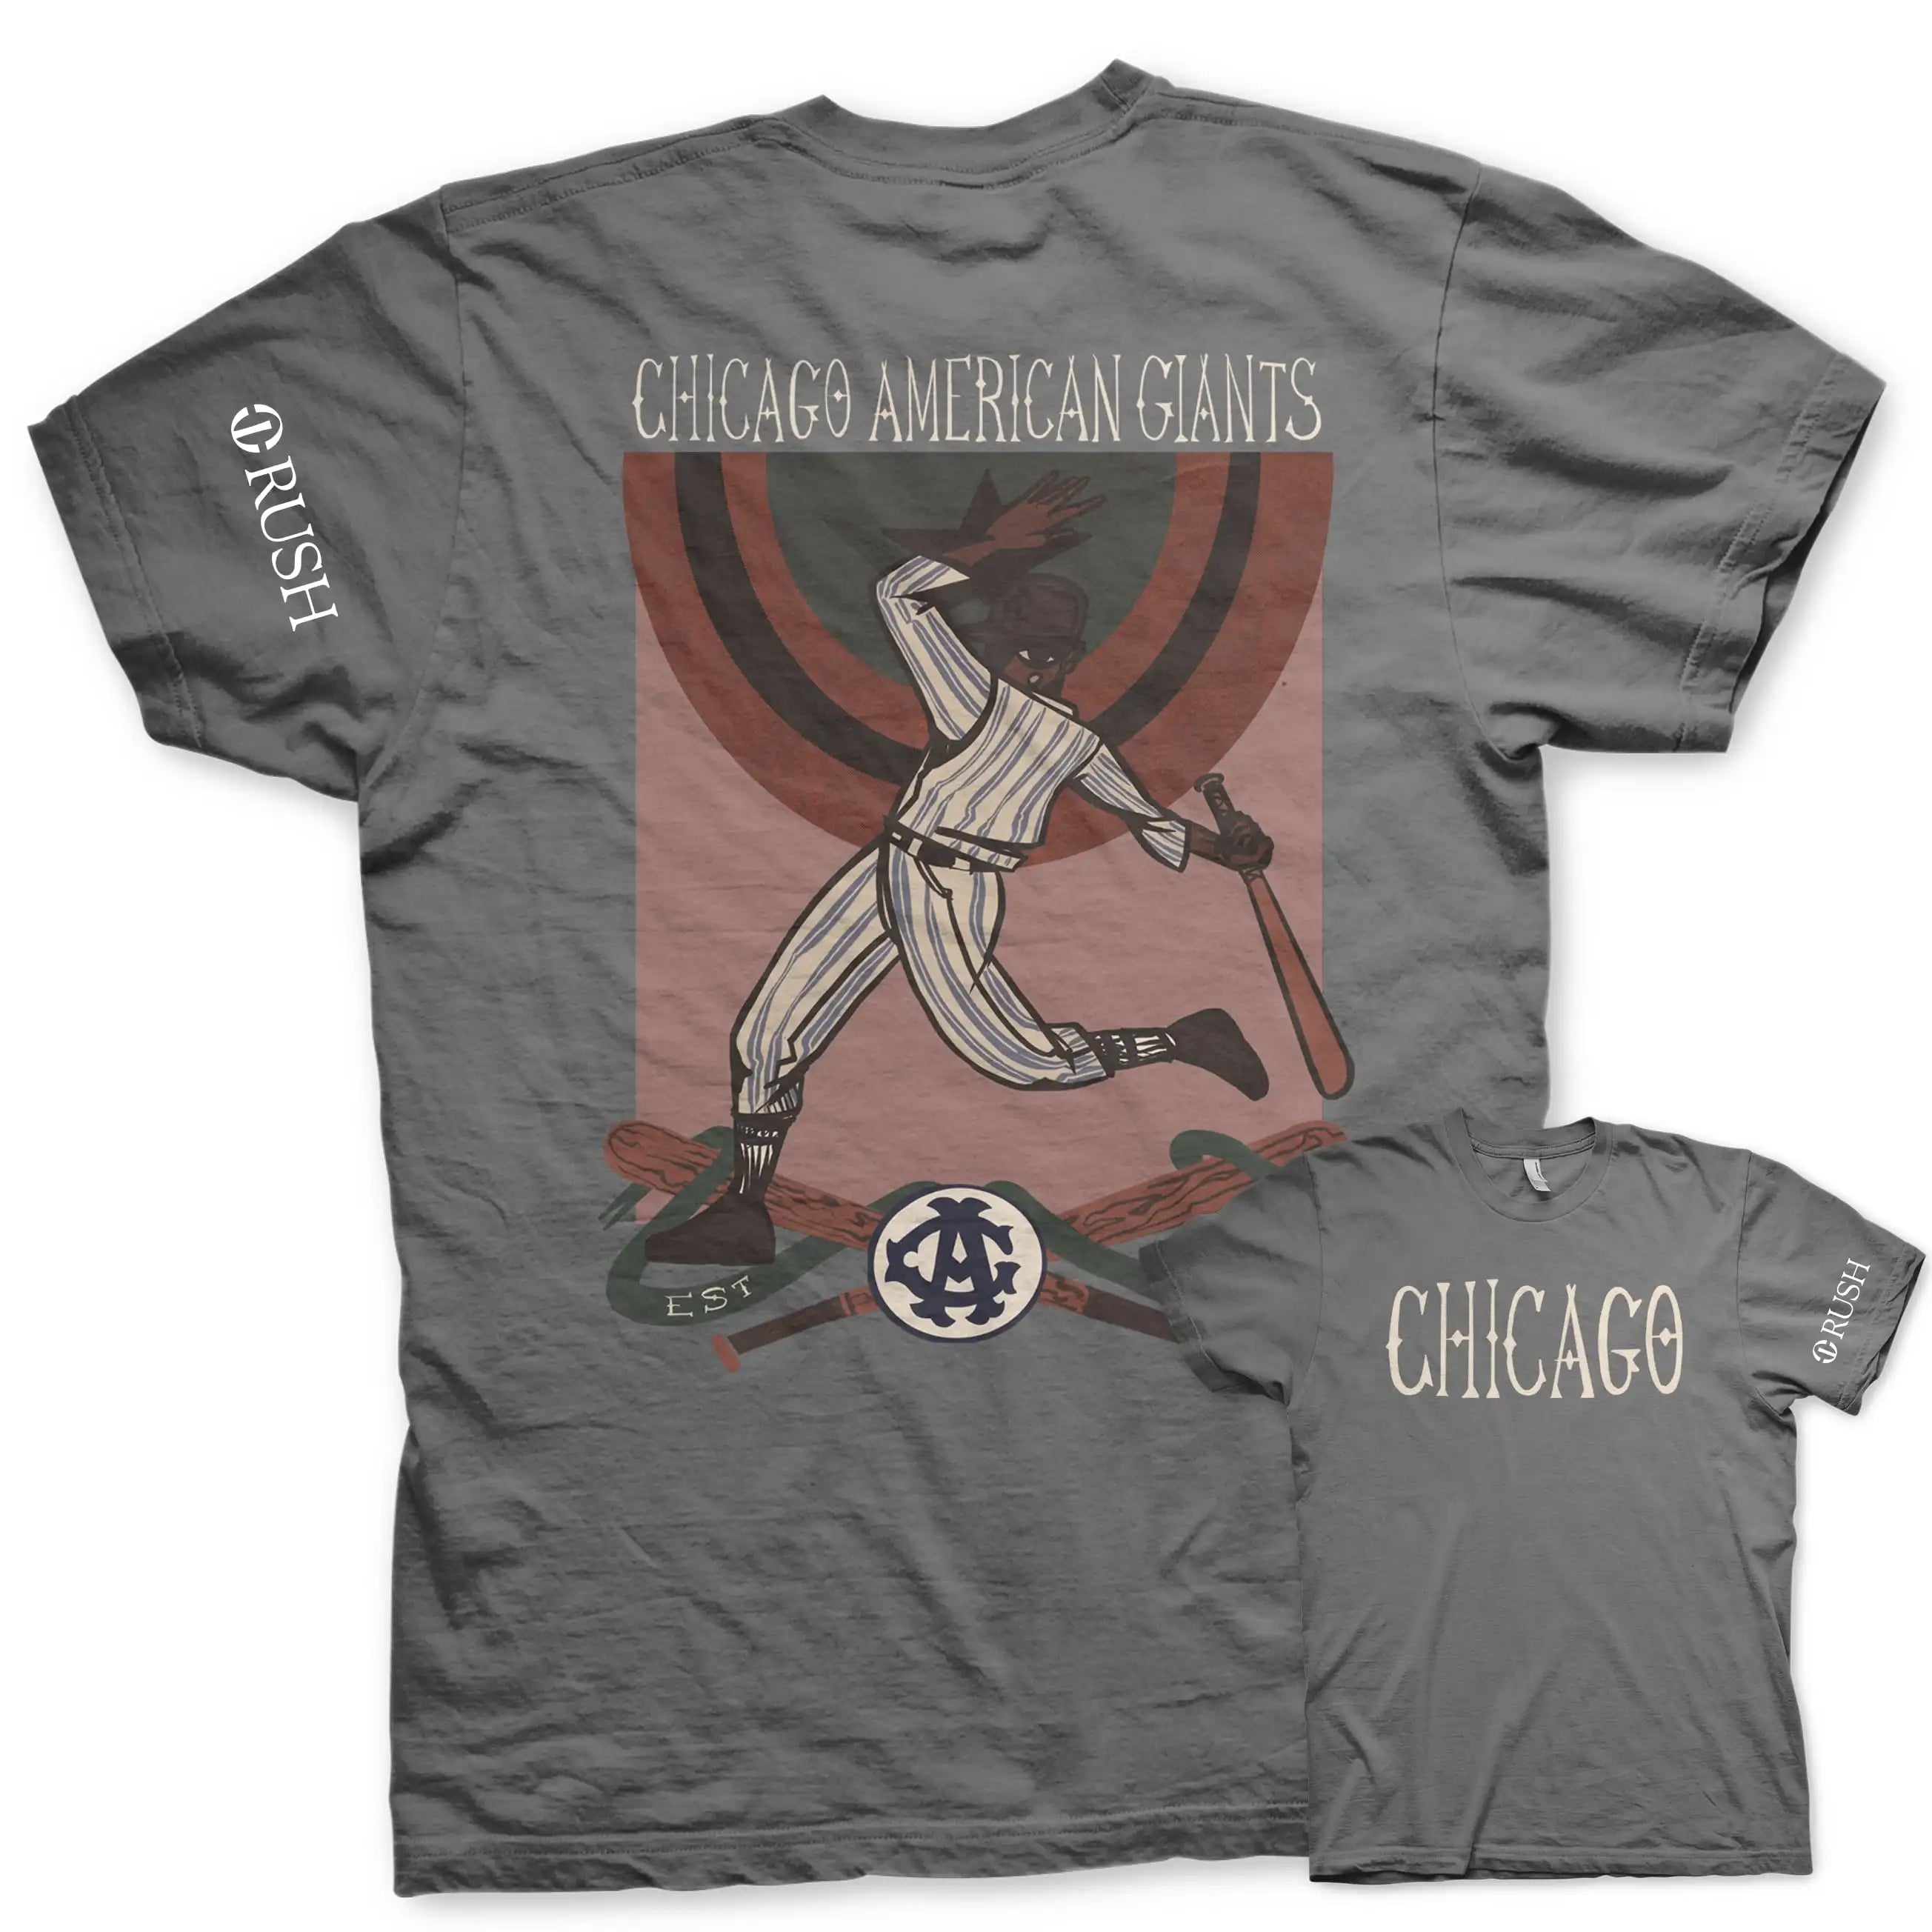 July 7th vs Tigers – Chicago American Giants T-Shirt by Langston Allston